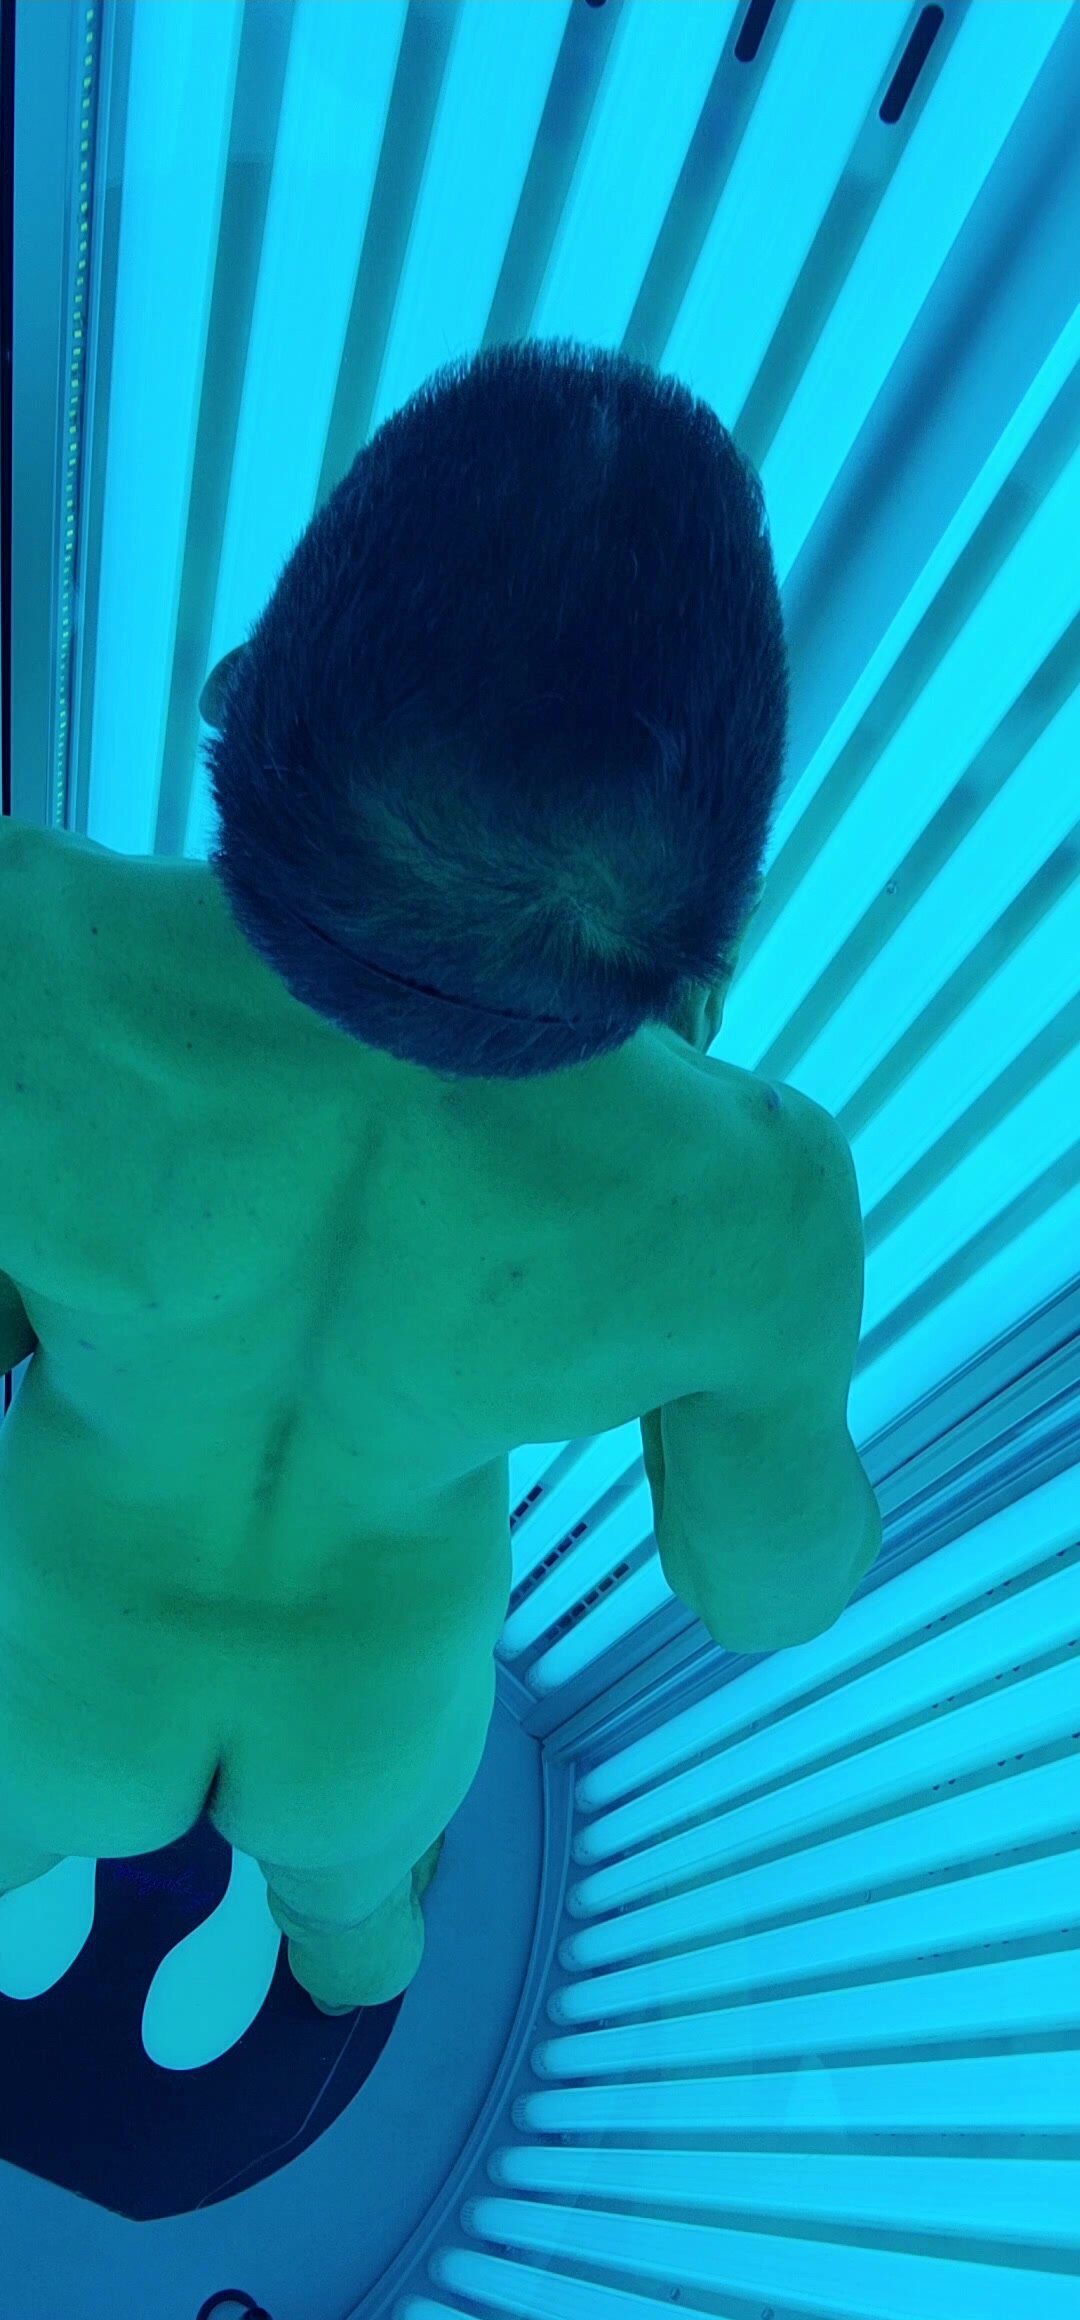 Tanning booth time